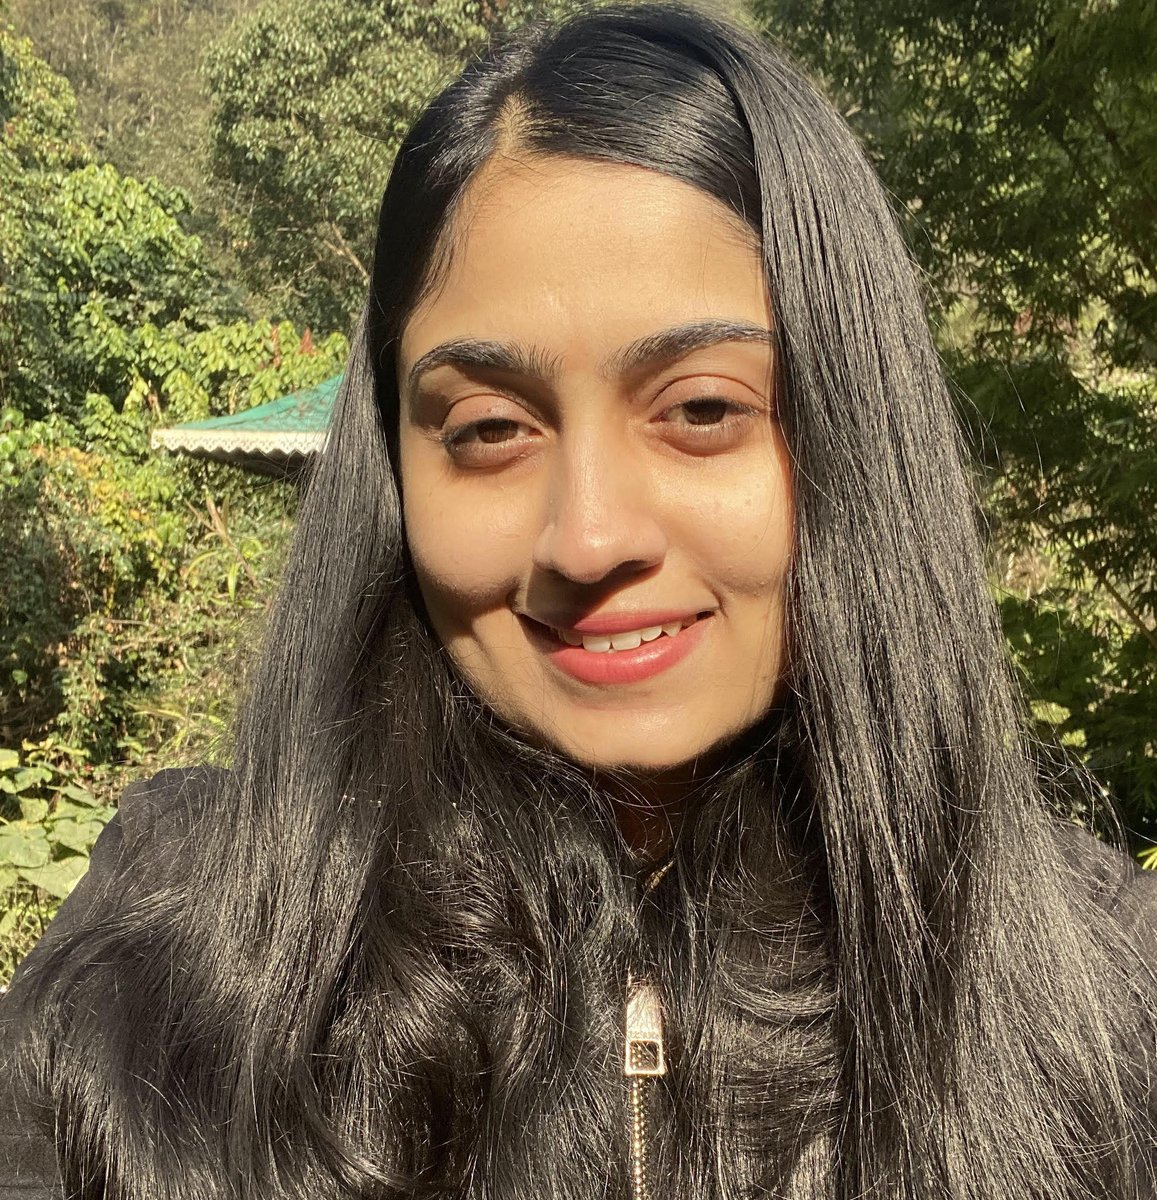 Welcome to Shruti! She is our newest research associate to join the lab and we're so excited to have her on the team! #womeninSTEM #womenintech #DukeBME